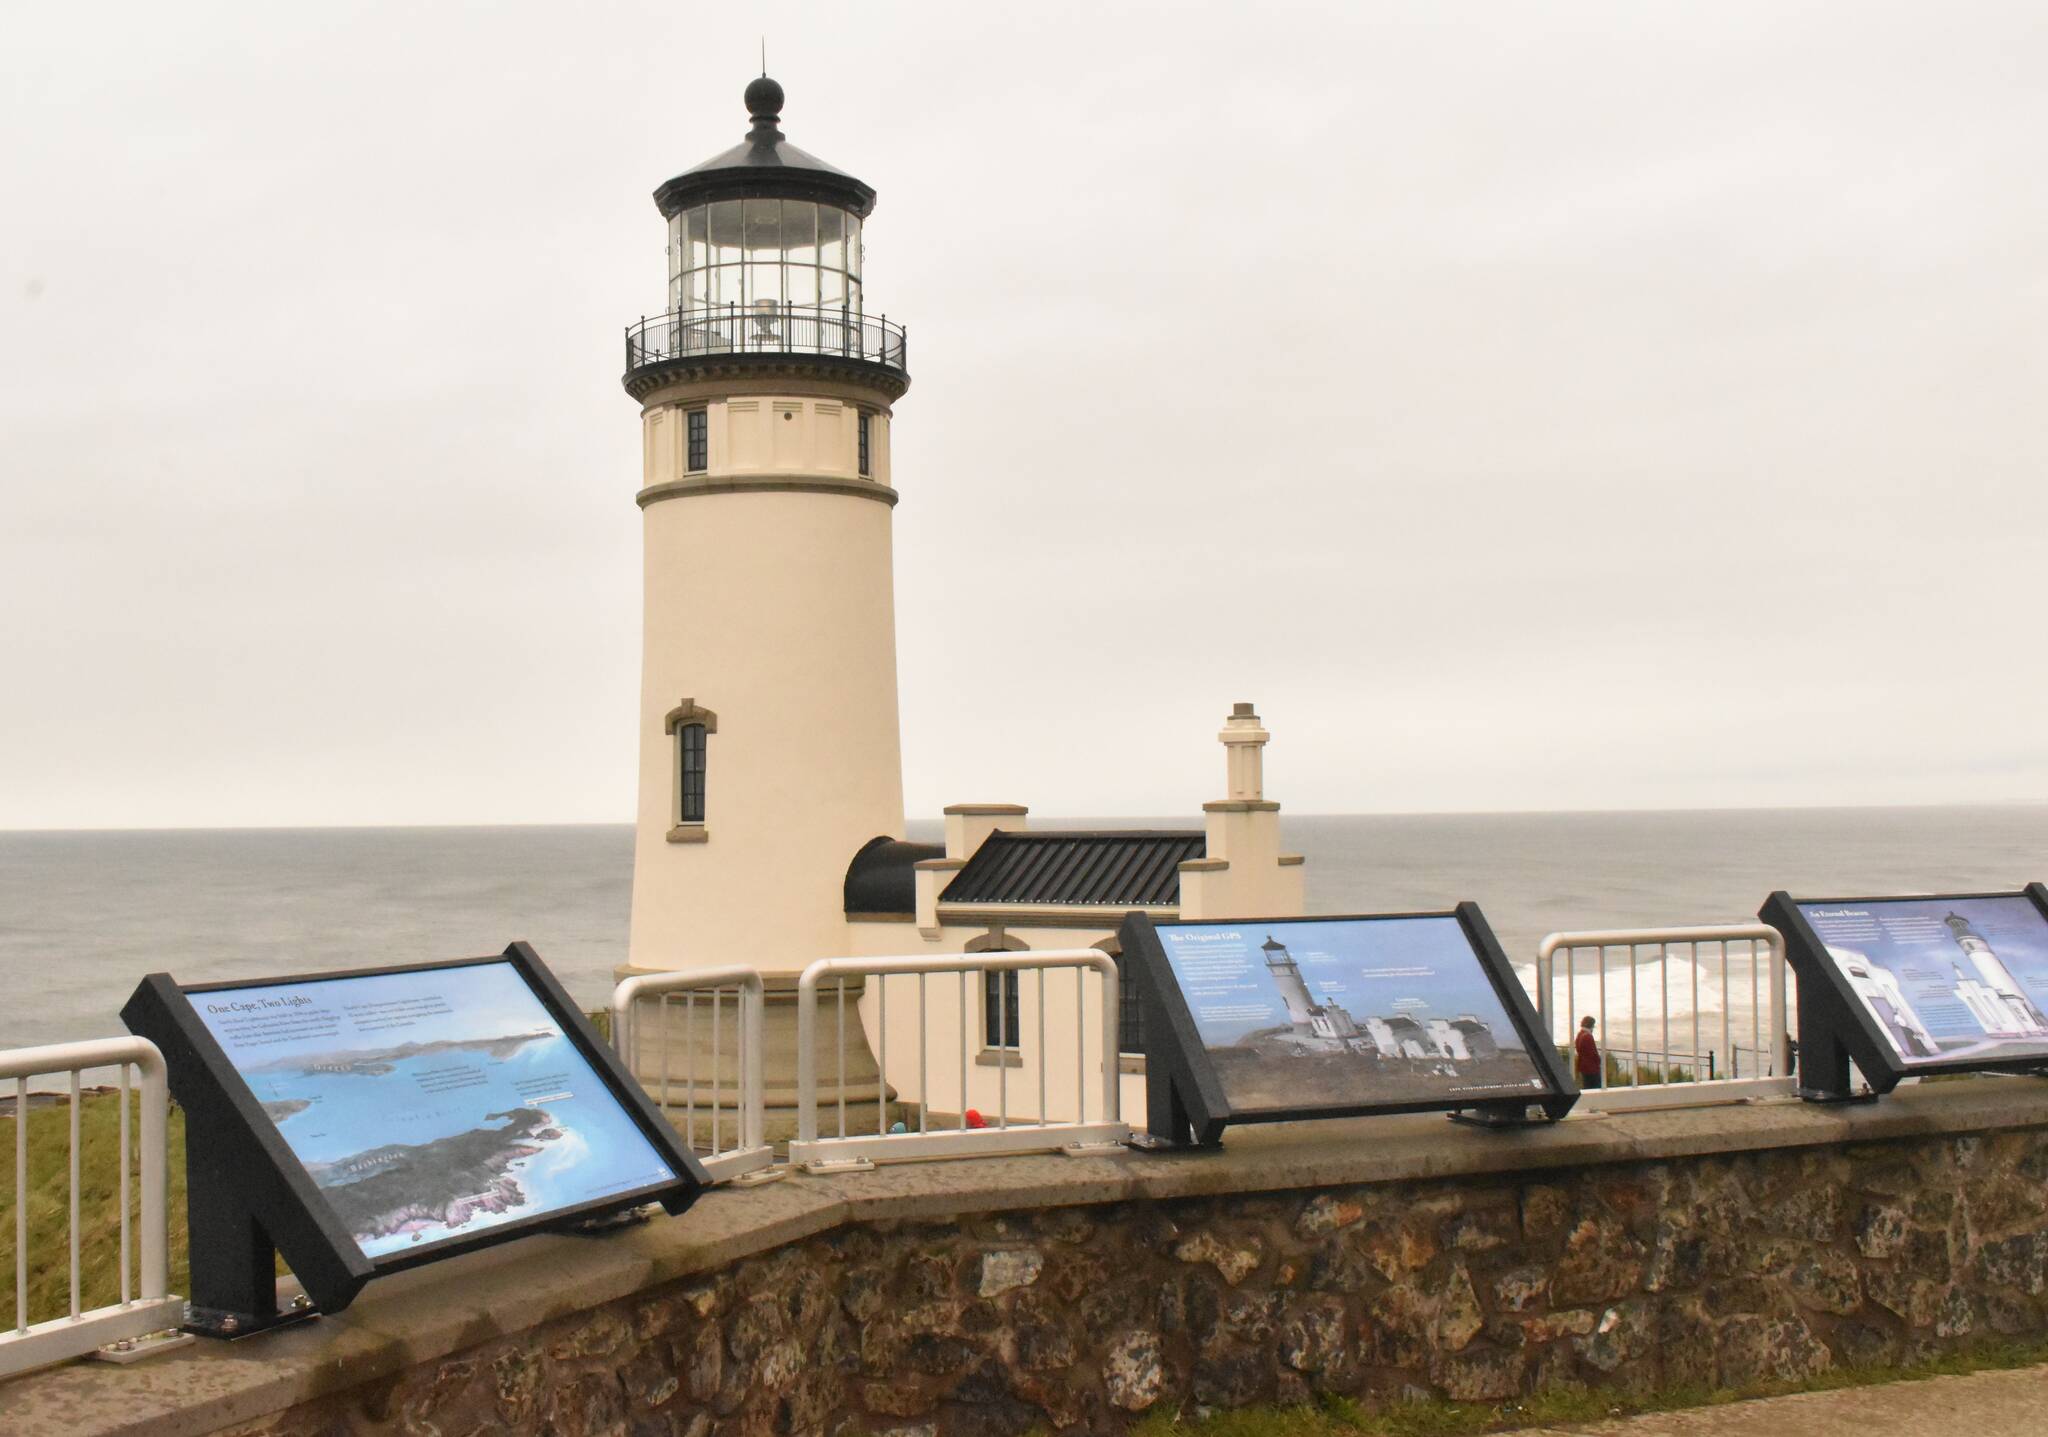 Among the highlights of a trip to Cape Disappointment State Park is a stop at the North Head Lighthouse. The original lighthouse, knows as the Cape Disappointment Lighthouse, went out of service in 1856, but ships continued to run aground at the mouth of the Columbia River, prompting the North Head Lighthouse to be built. Photo by Kevin Hanson